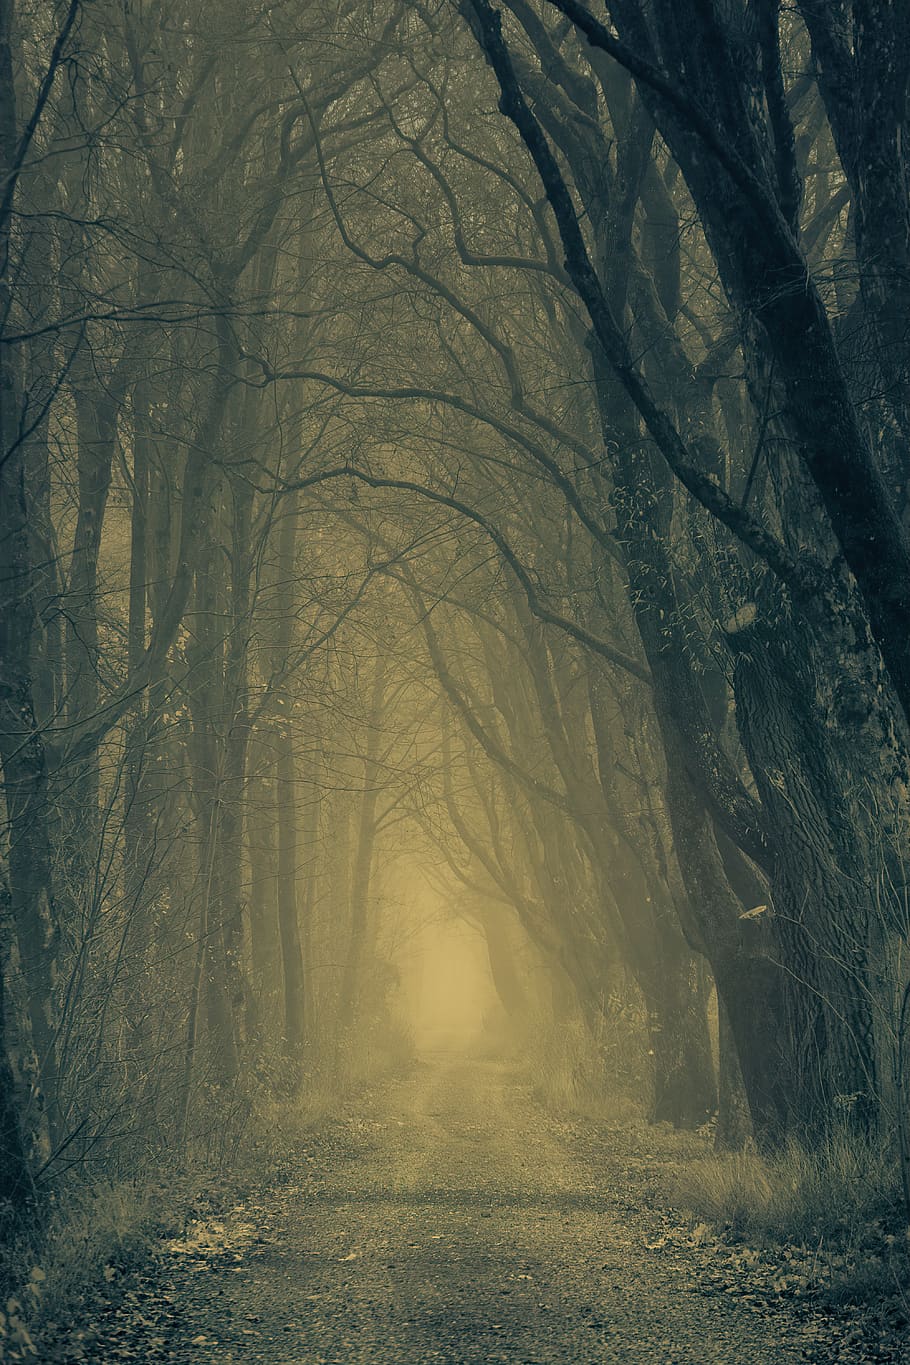 secret, forest, darkness, nature, trees, avenue, passage, gang, away, atmosphere